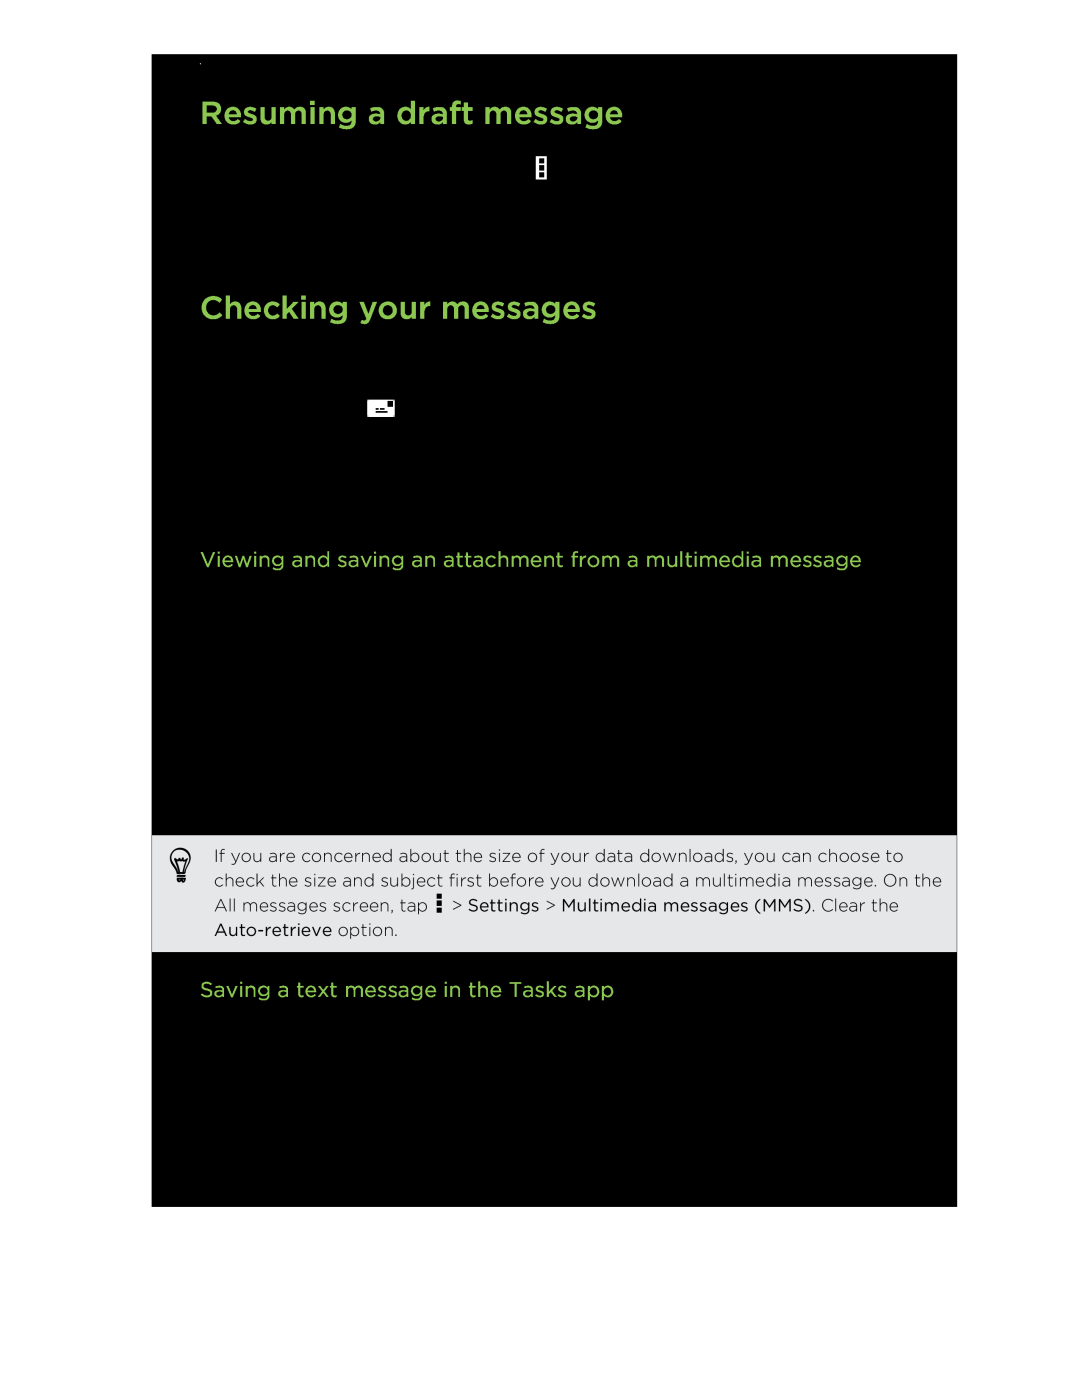 HTC C3HTCONEV4GBUNLOCKEDBLACK Resuming a draft message, Checking your messages, Saving a text message in the Tasks app 